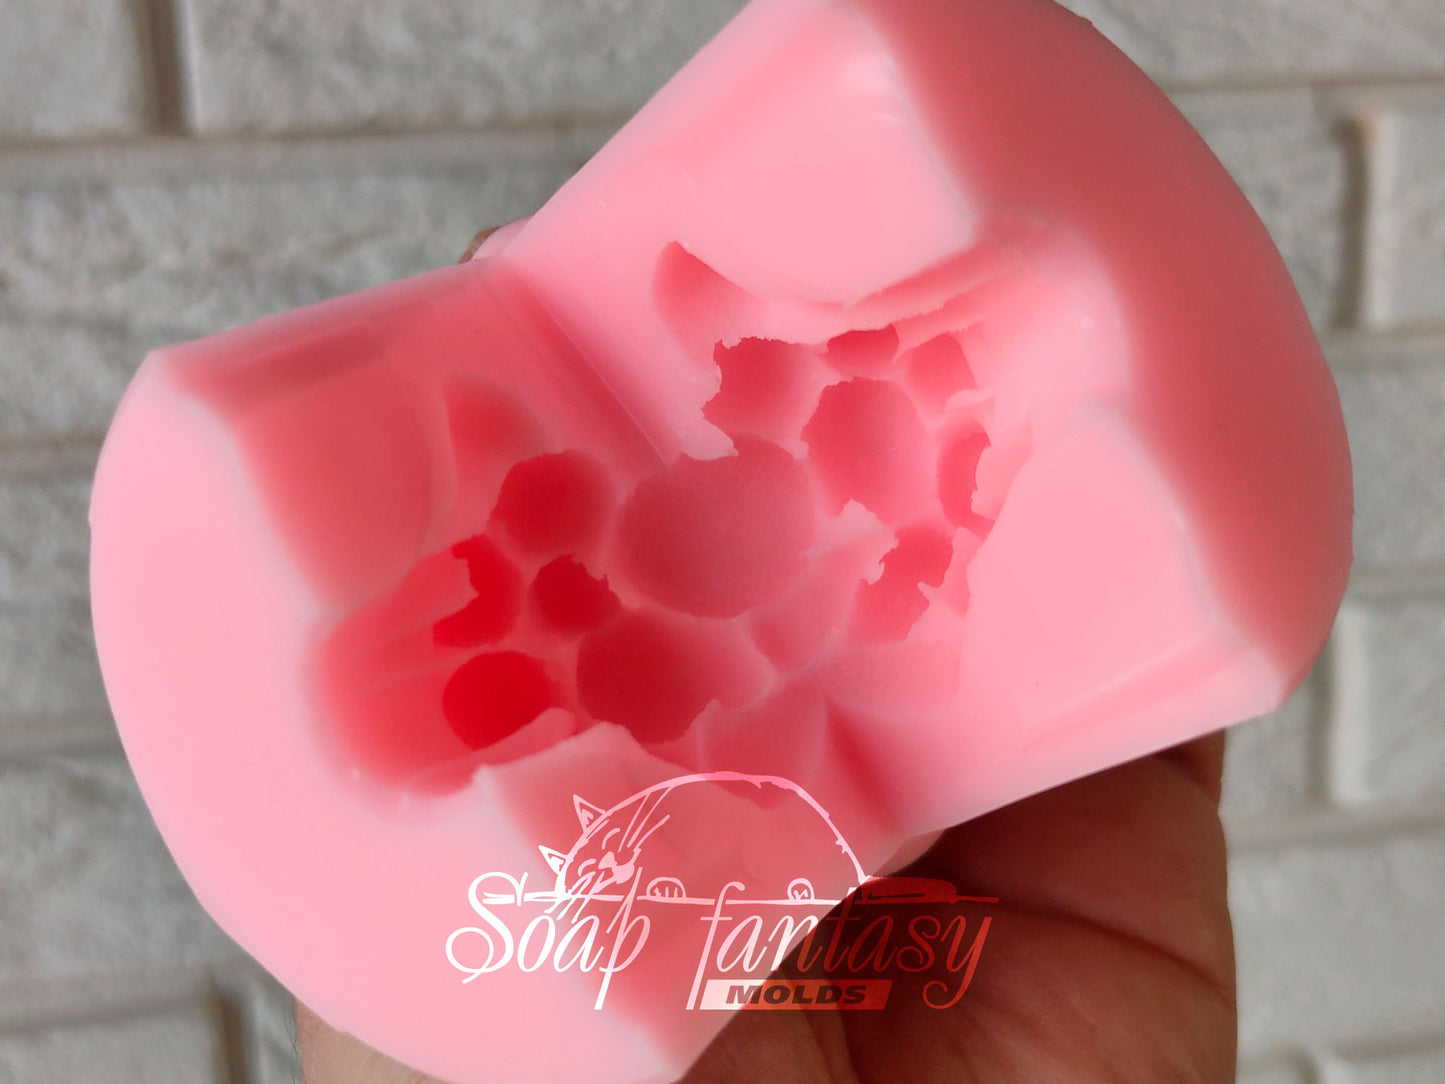 Silver Brunia plants silicone mold for soap making